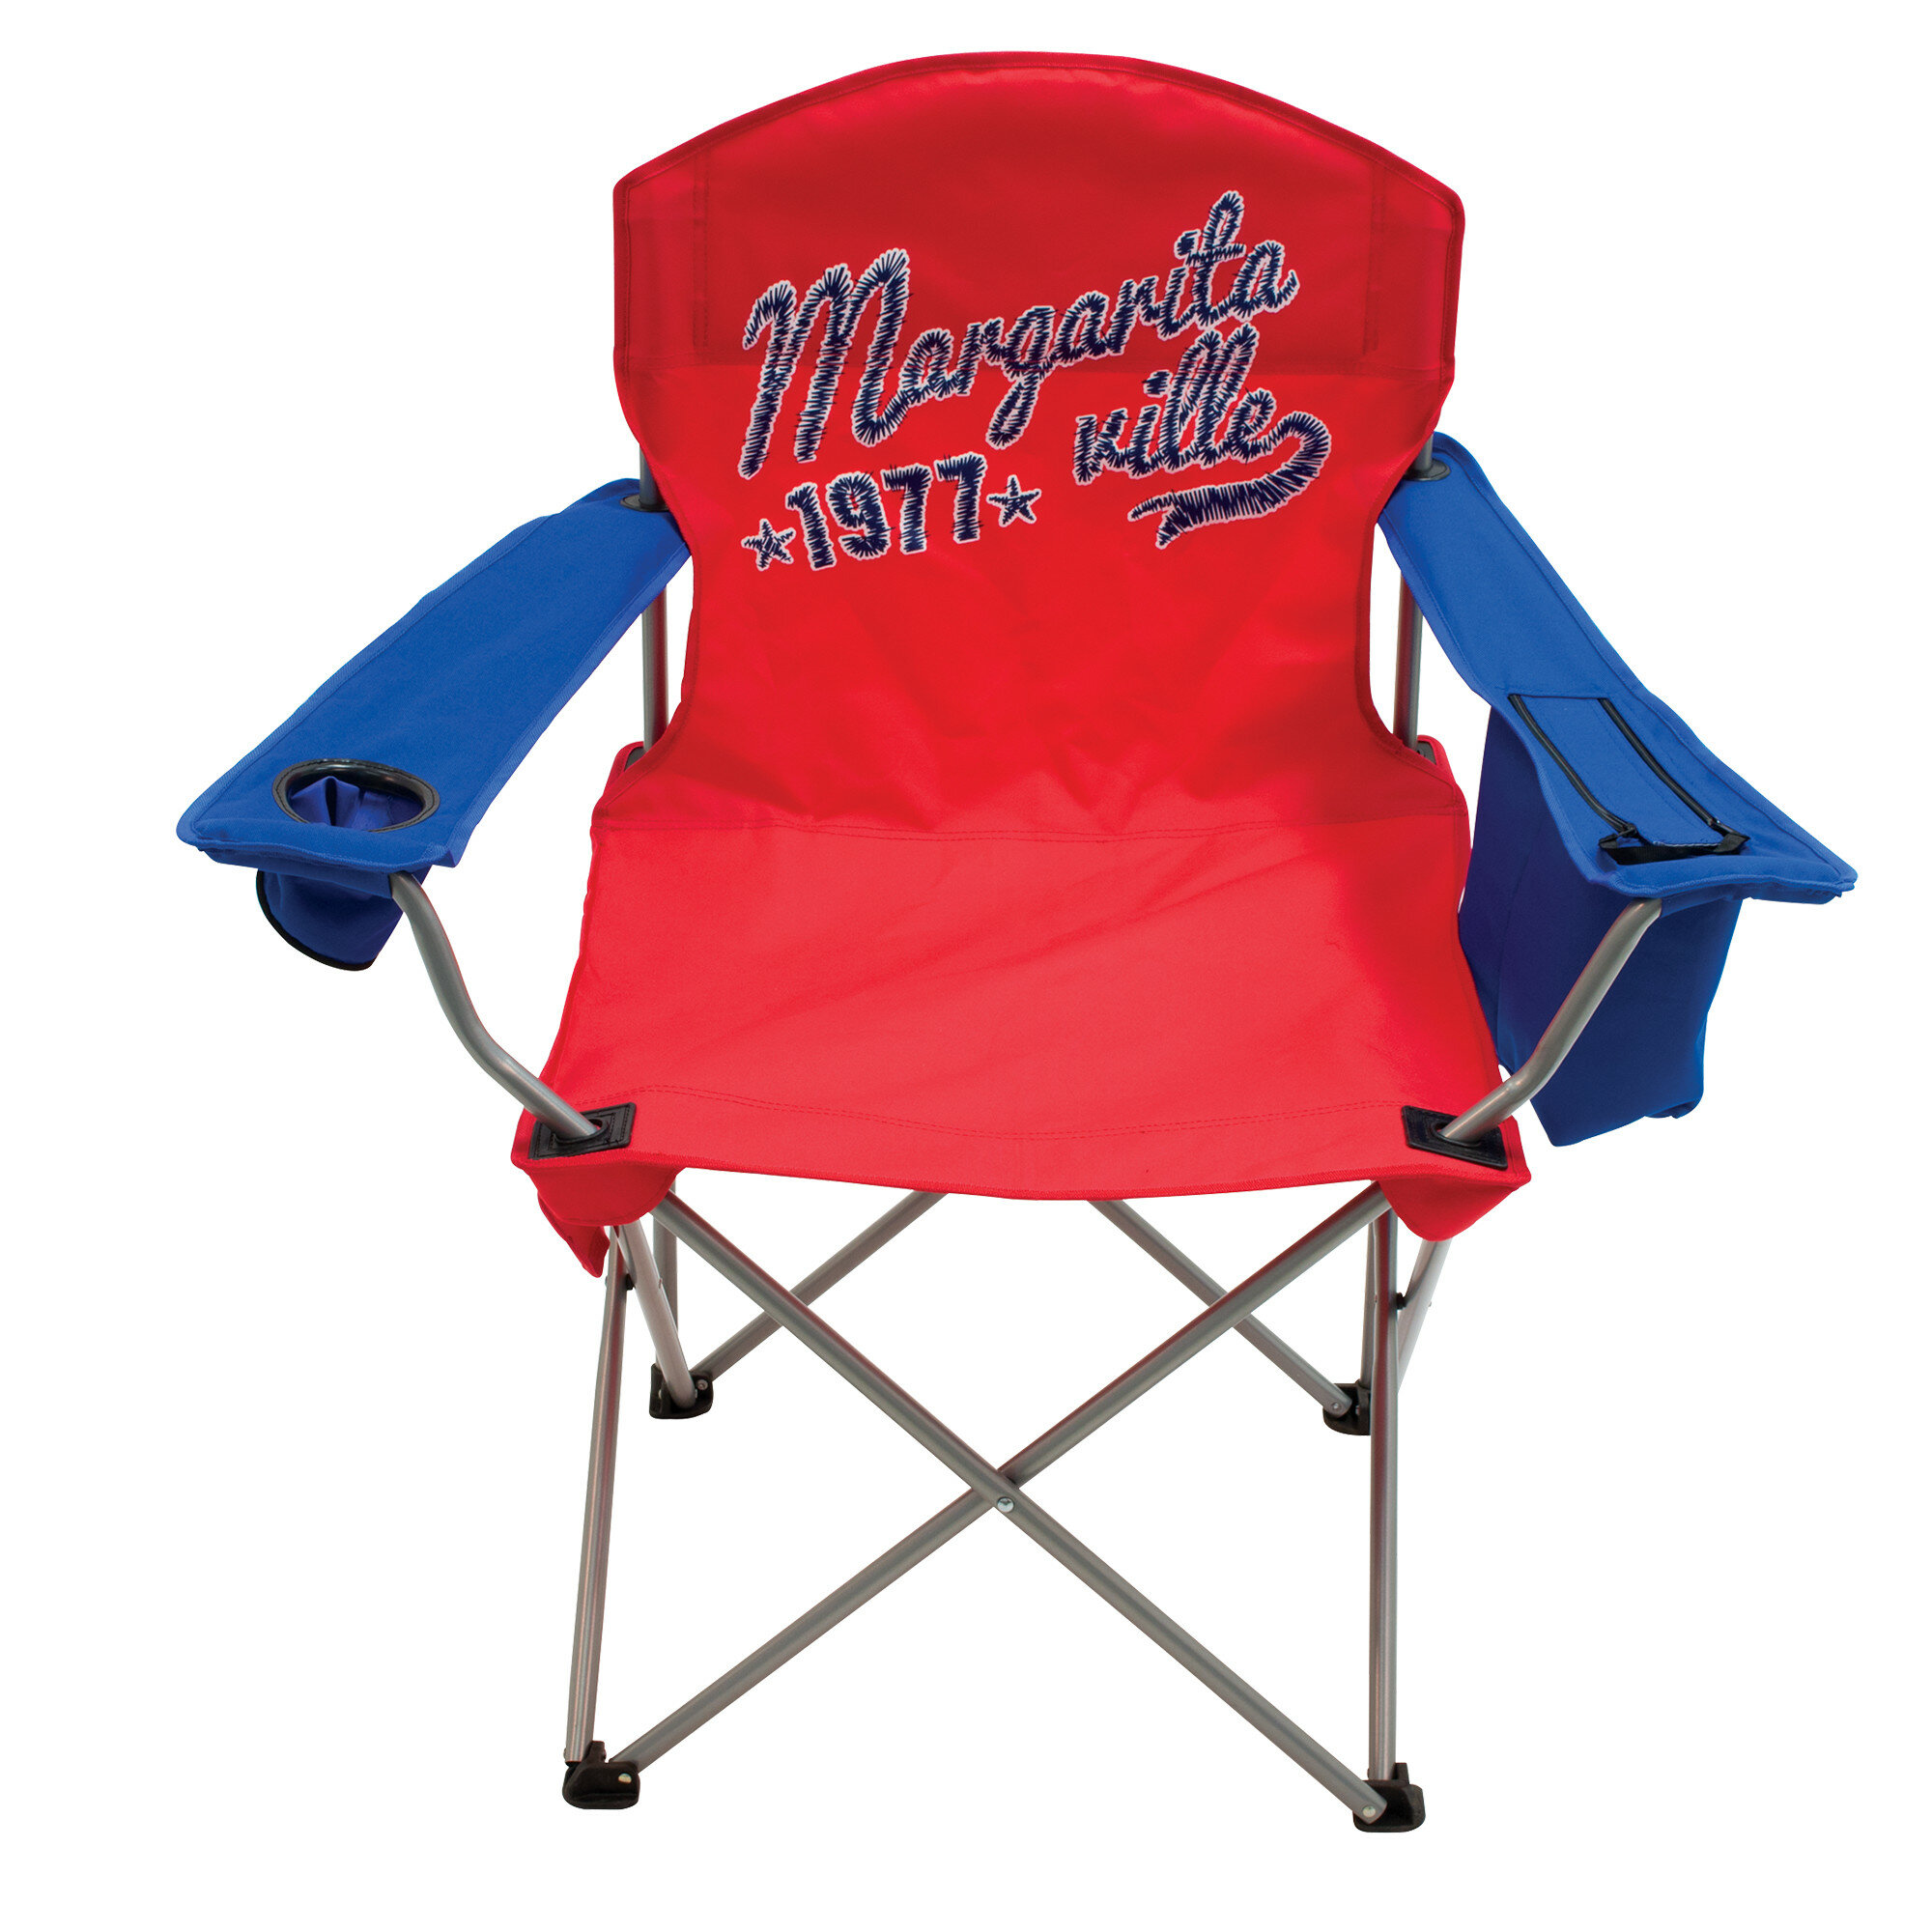 75 Recomended Margaritaville big beach chair for Thanksgiving Day